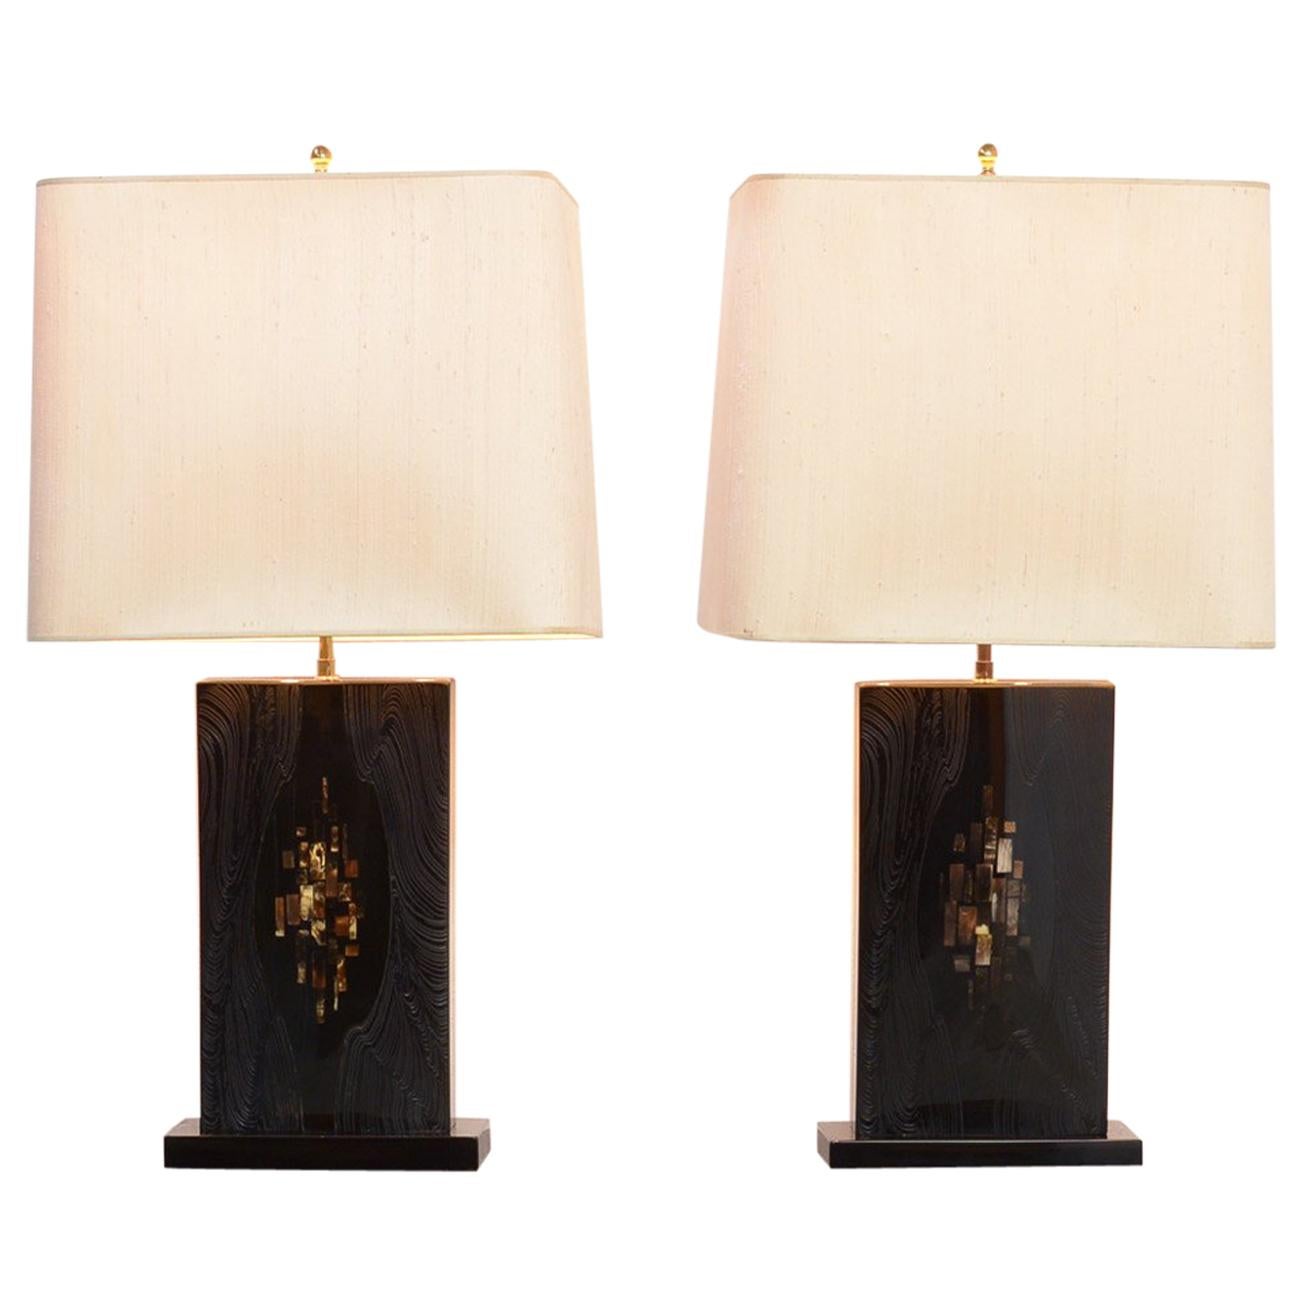 Impressive Pair of Black Lacquered Table Lamps by Jean Claude Dresse